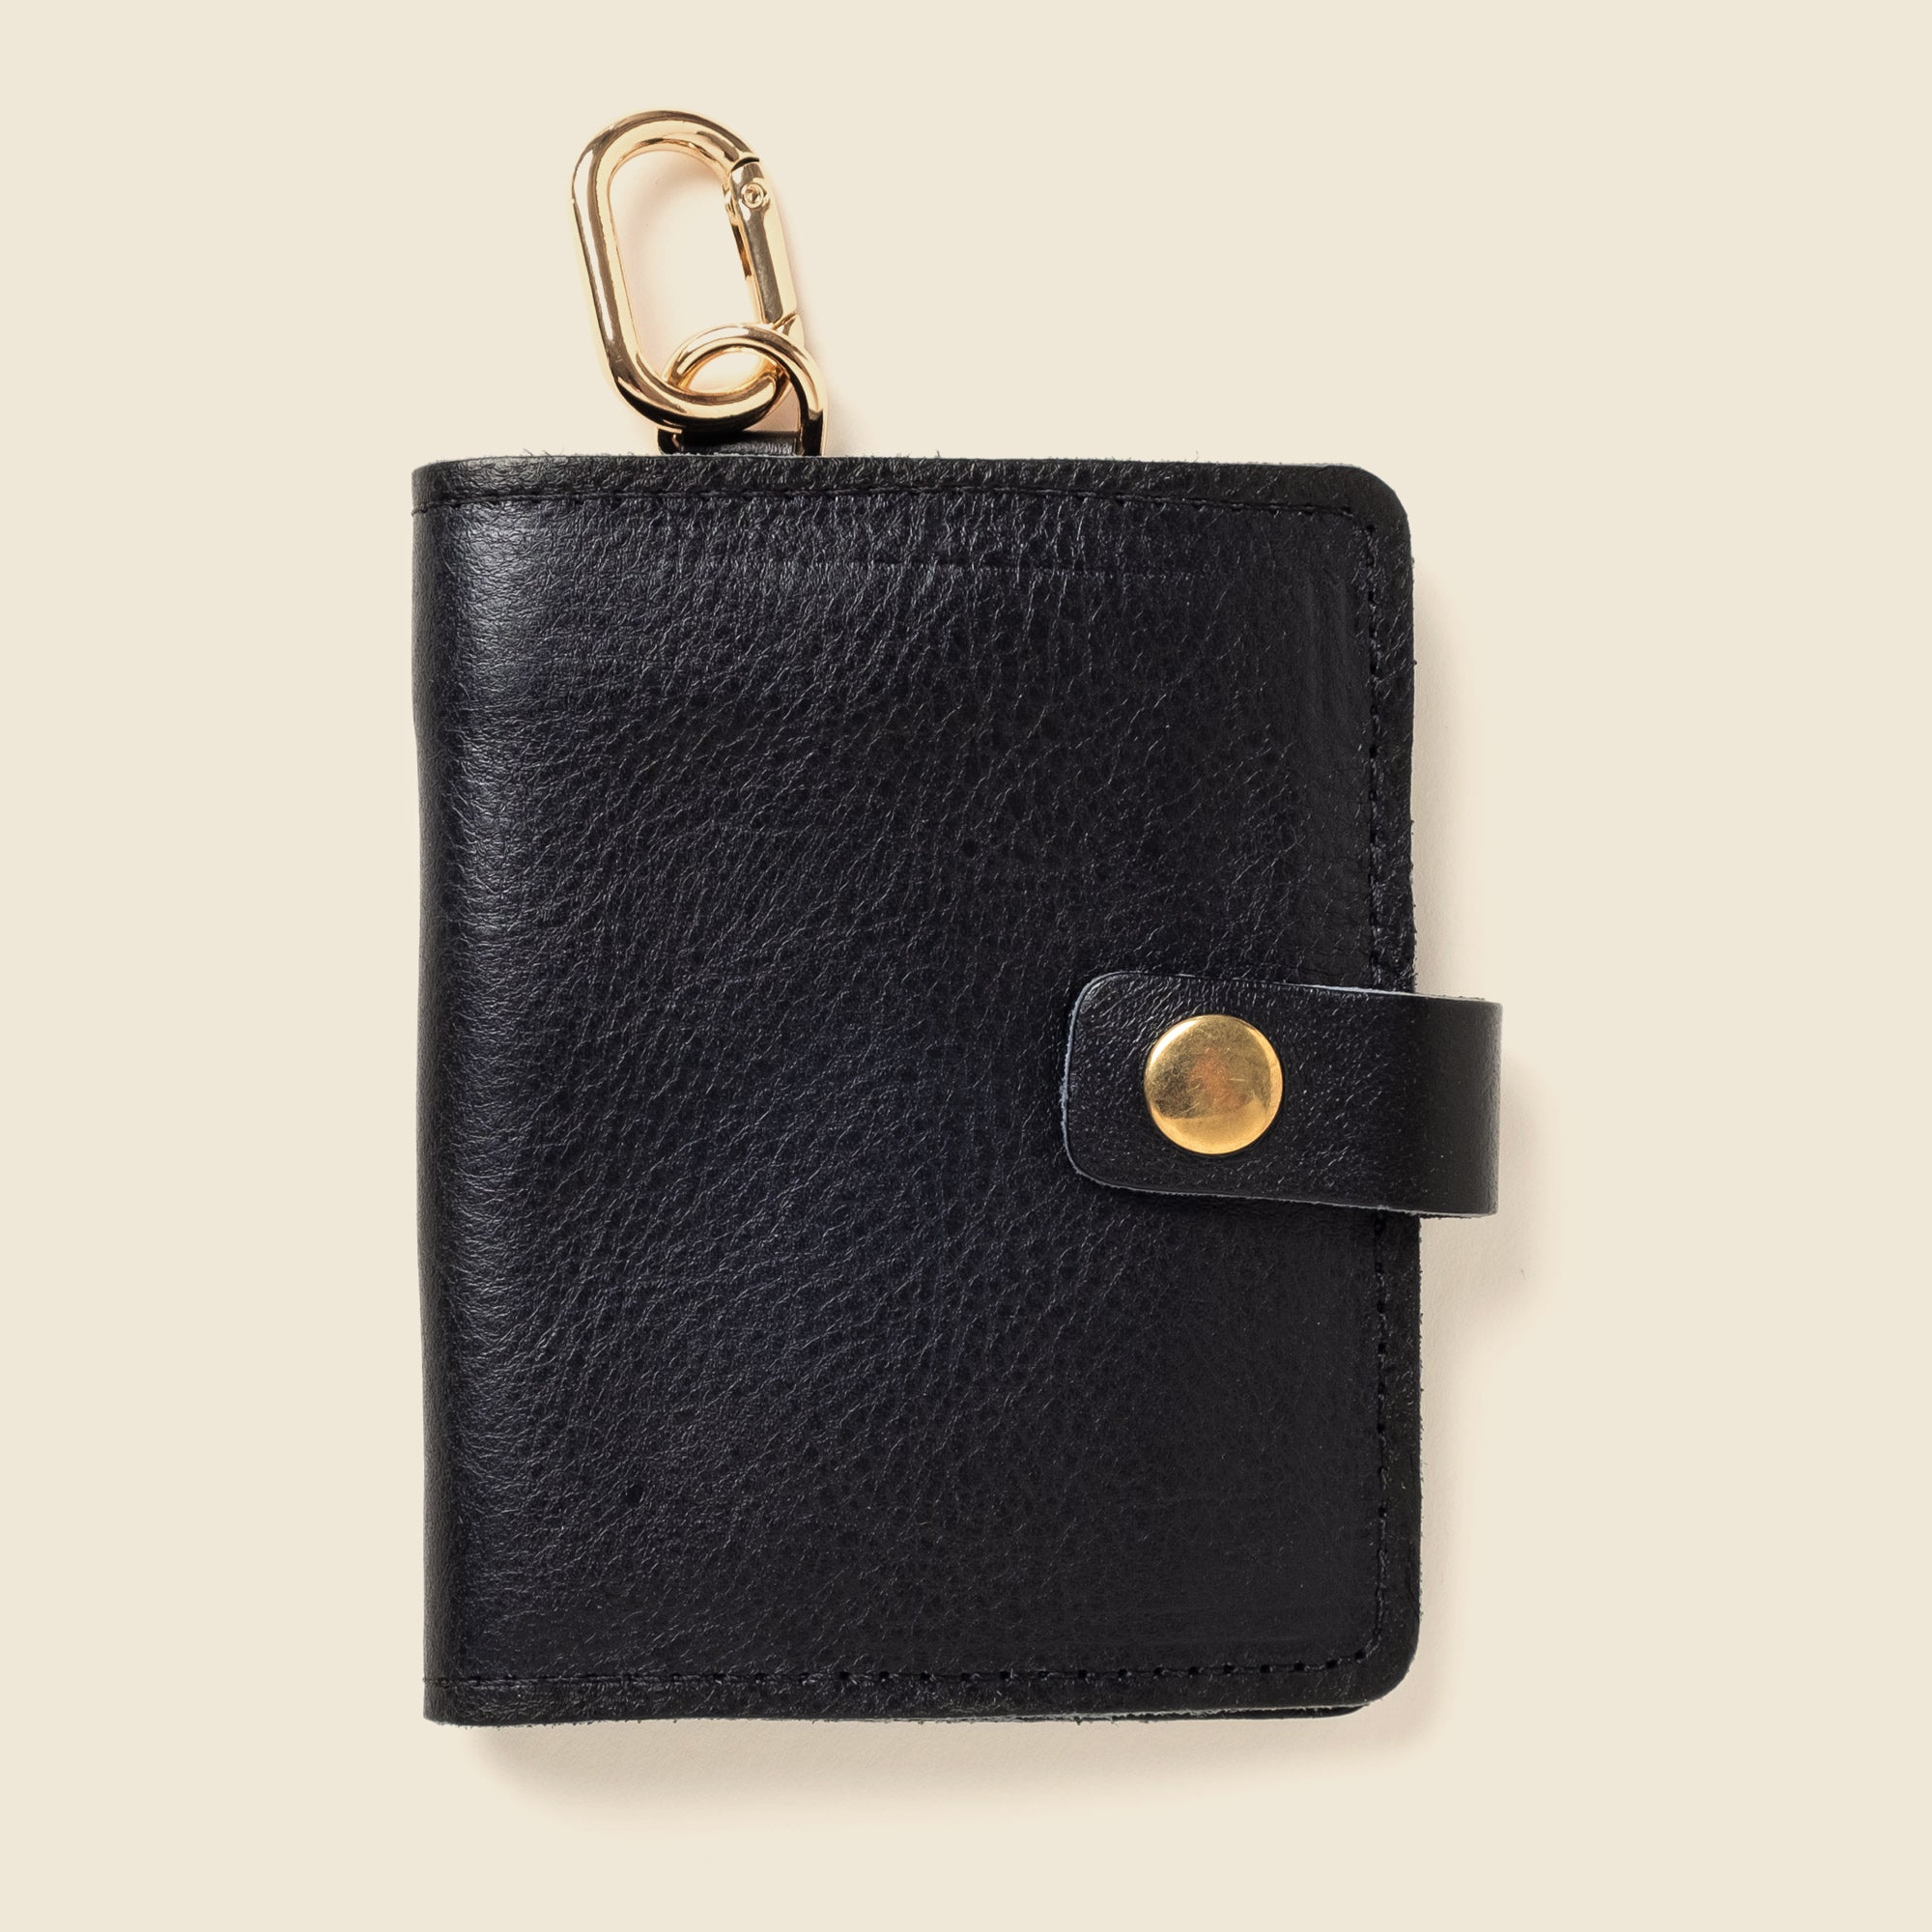 Black leather wallet for keys with snap closure – CASUPO